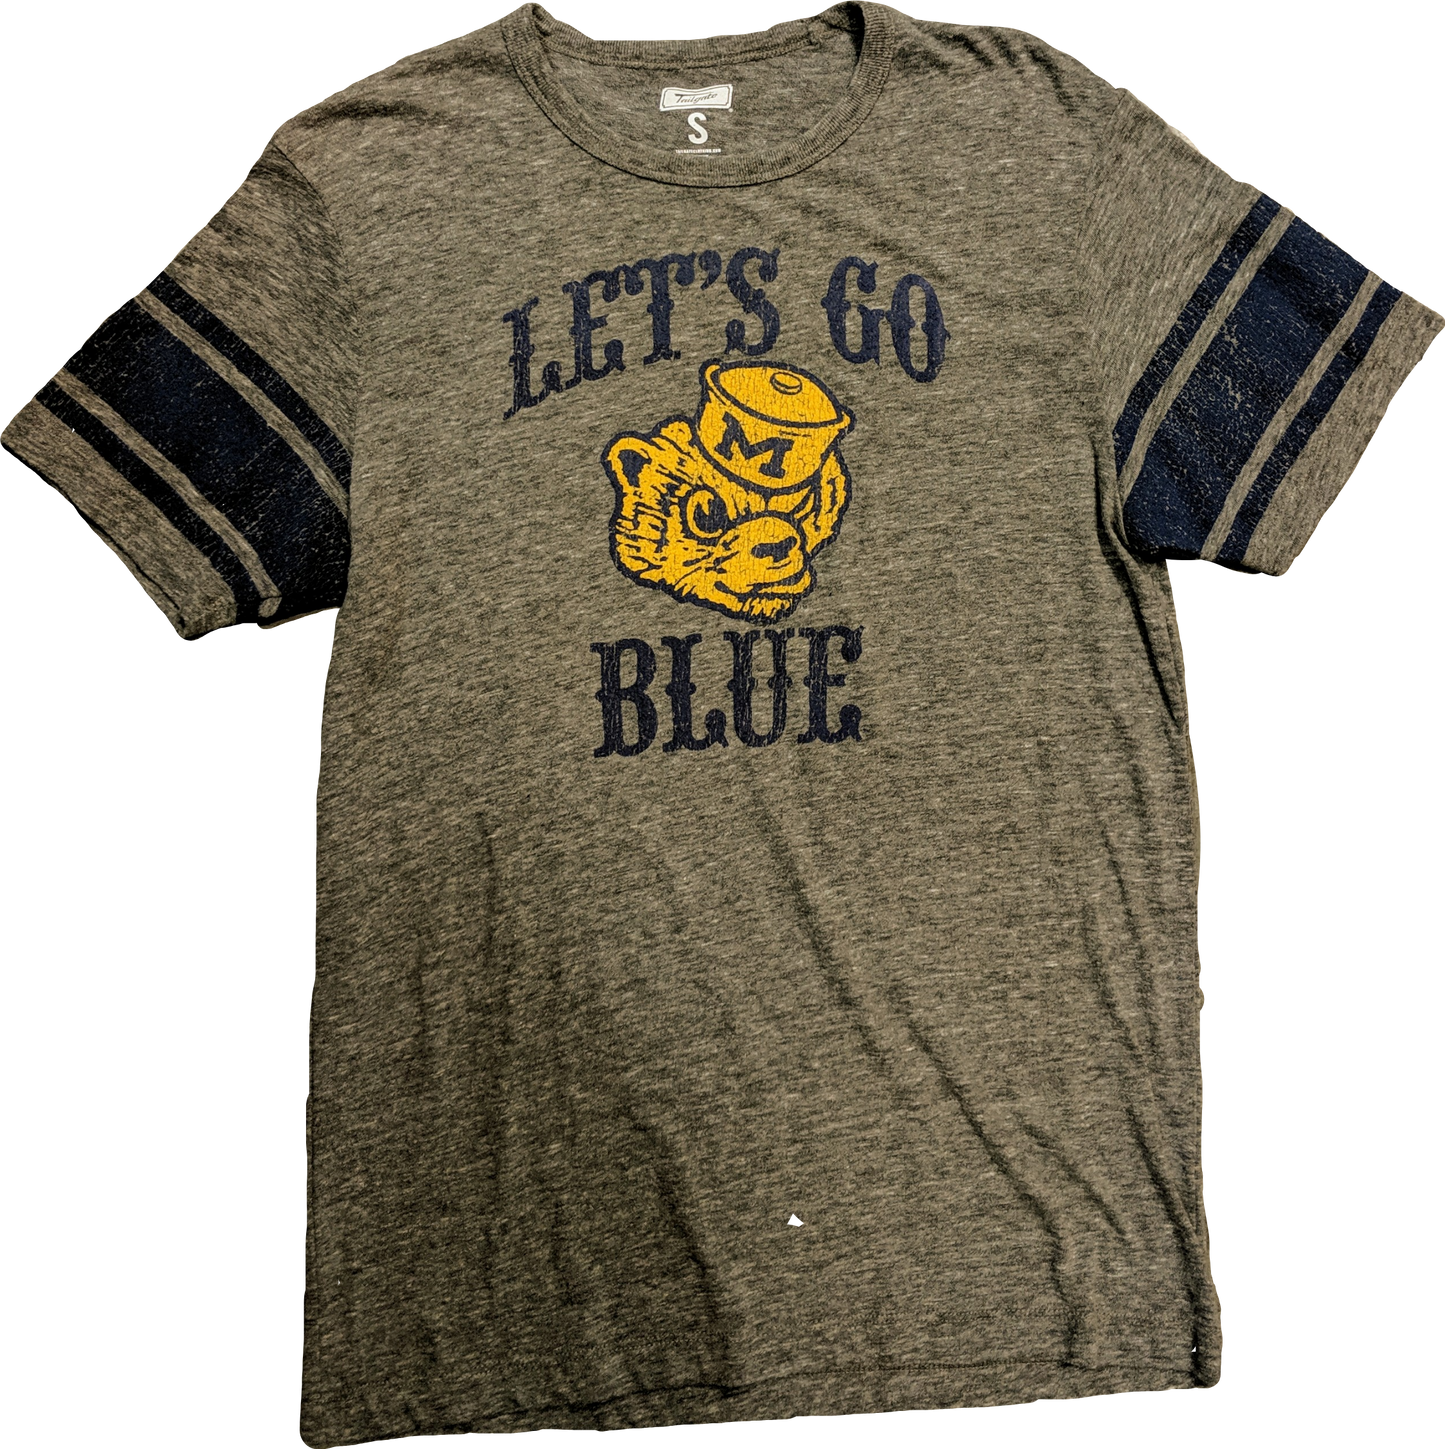 Men's Michigan Wolverines Homecoming Tri-Blend Tee By Tailgate Clothing Co.